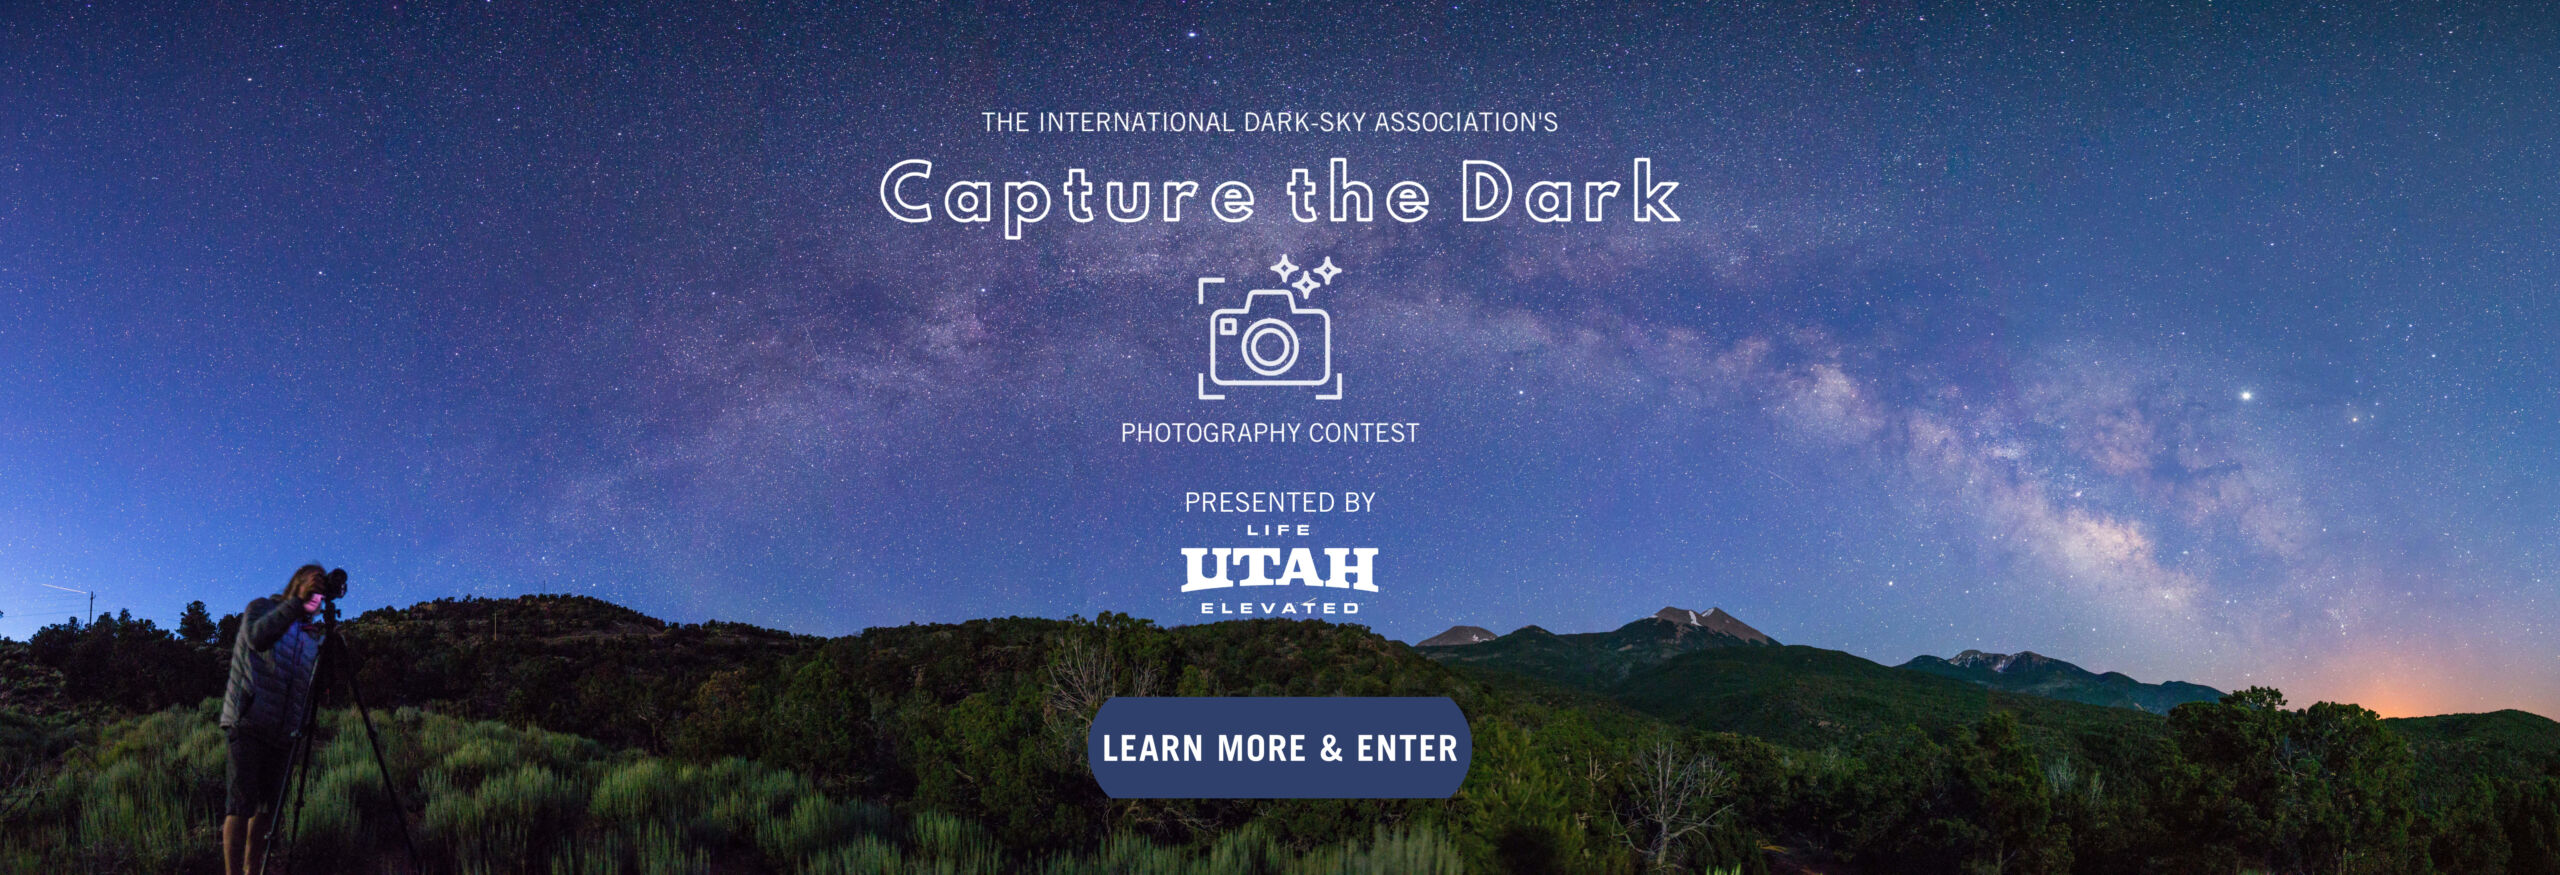 The International Dark-Sky Association's Capture the Dark Photography Contest Presented by Visit Utah Learn More and Enter